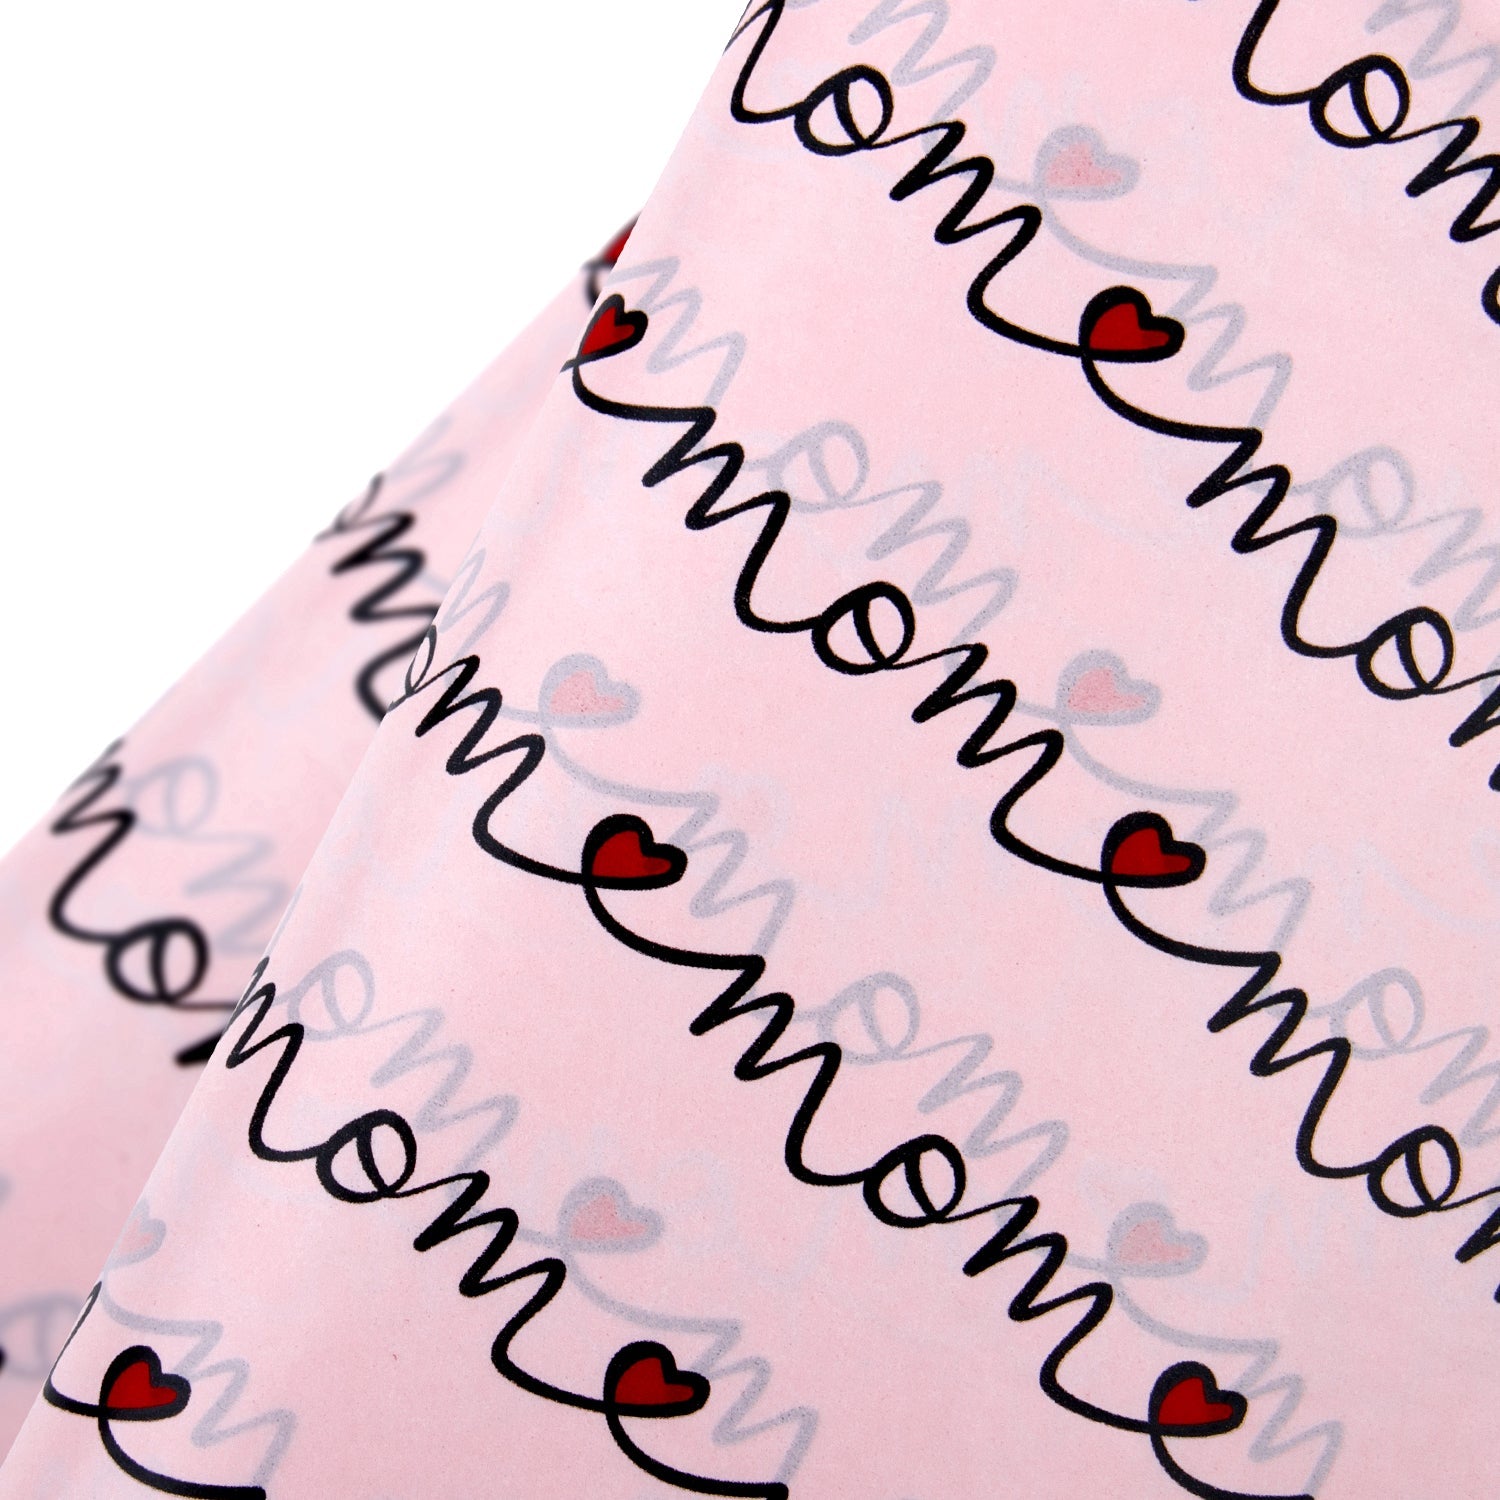 Gift Wrapping Tissue Paper- 24 Sheets - 19.7" x 27.5" Mom Design